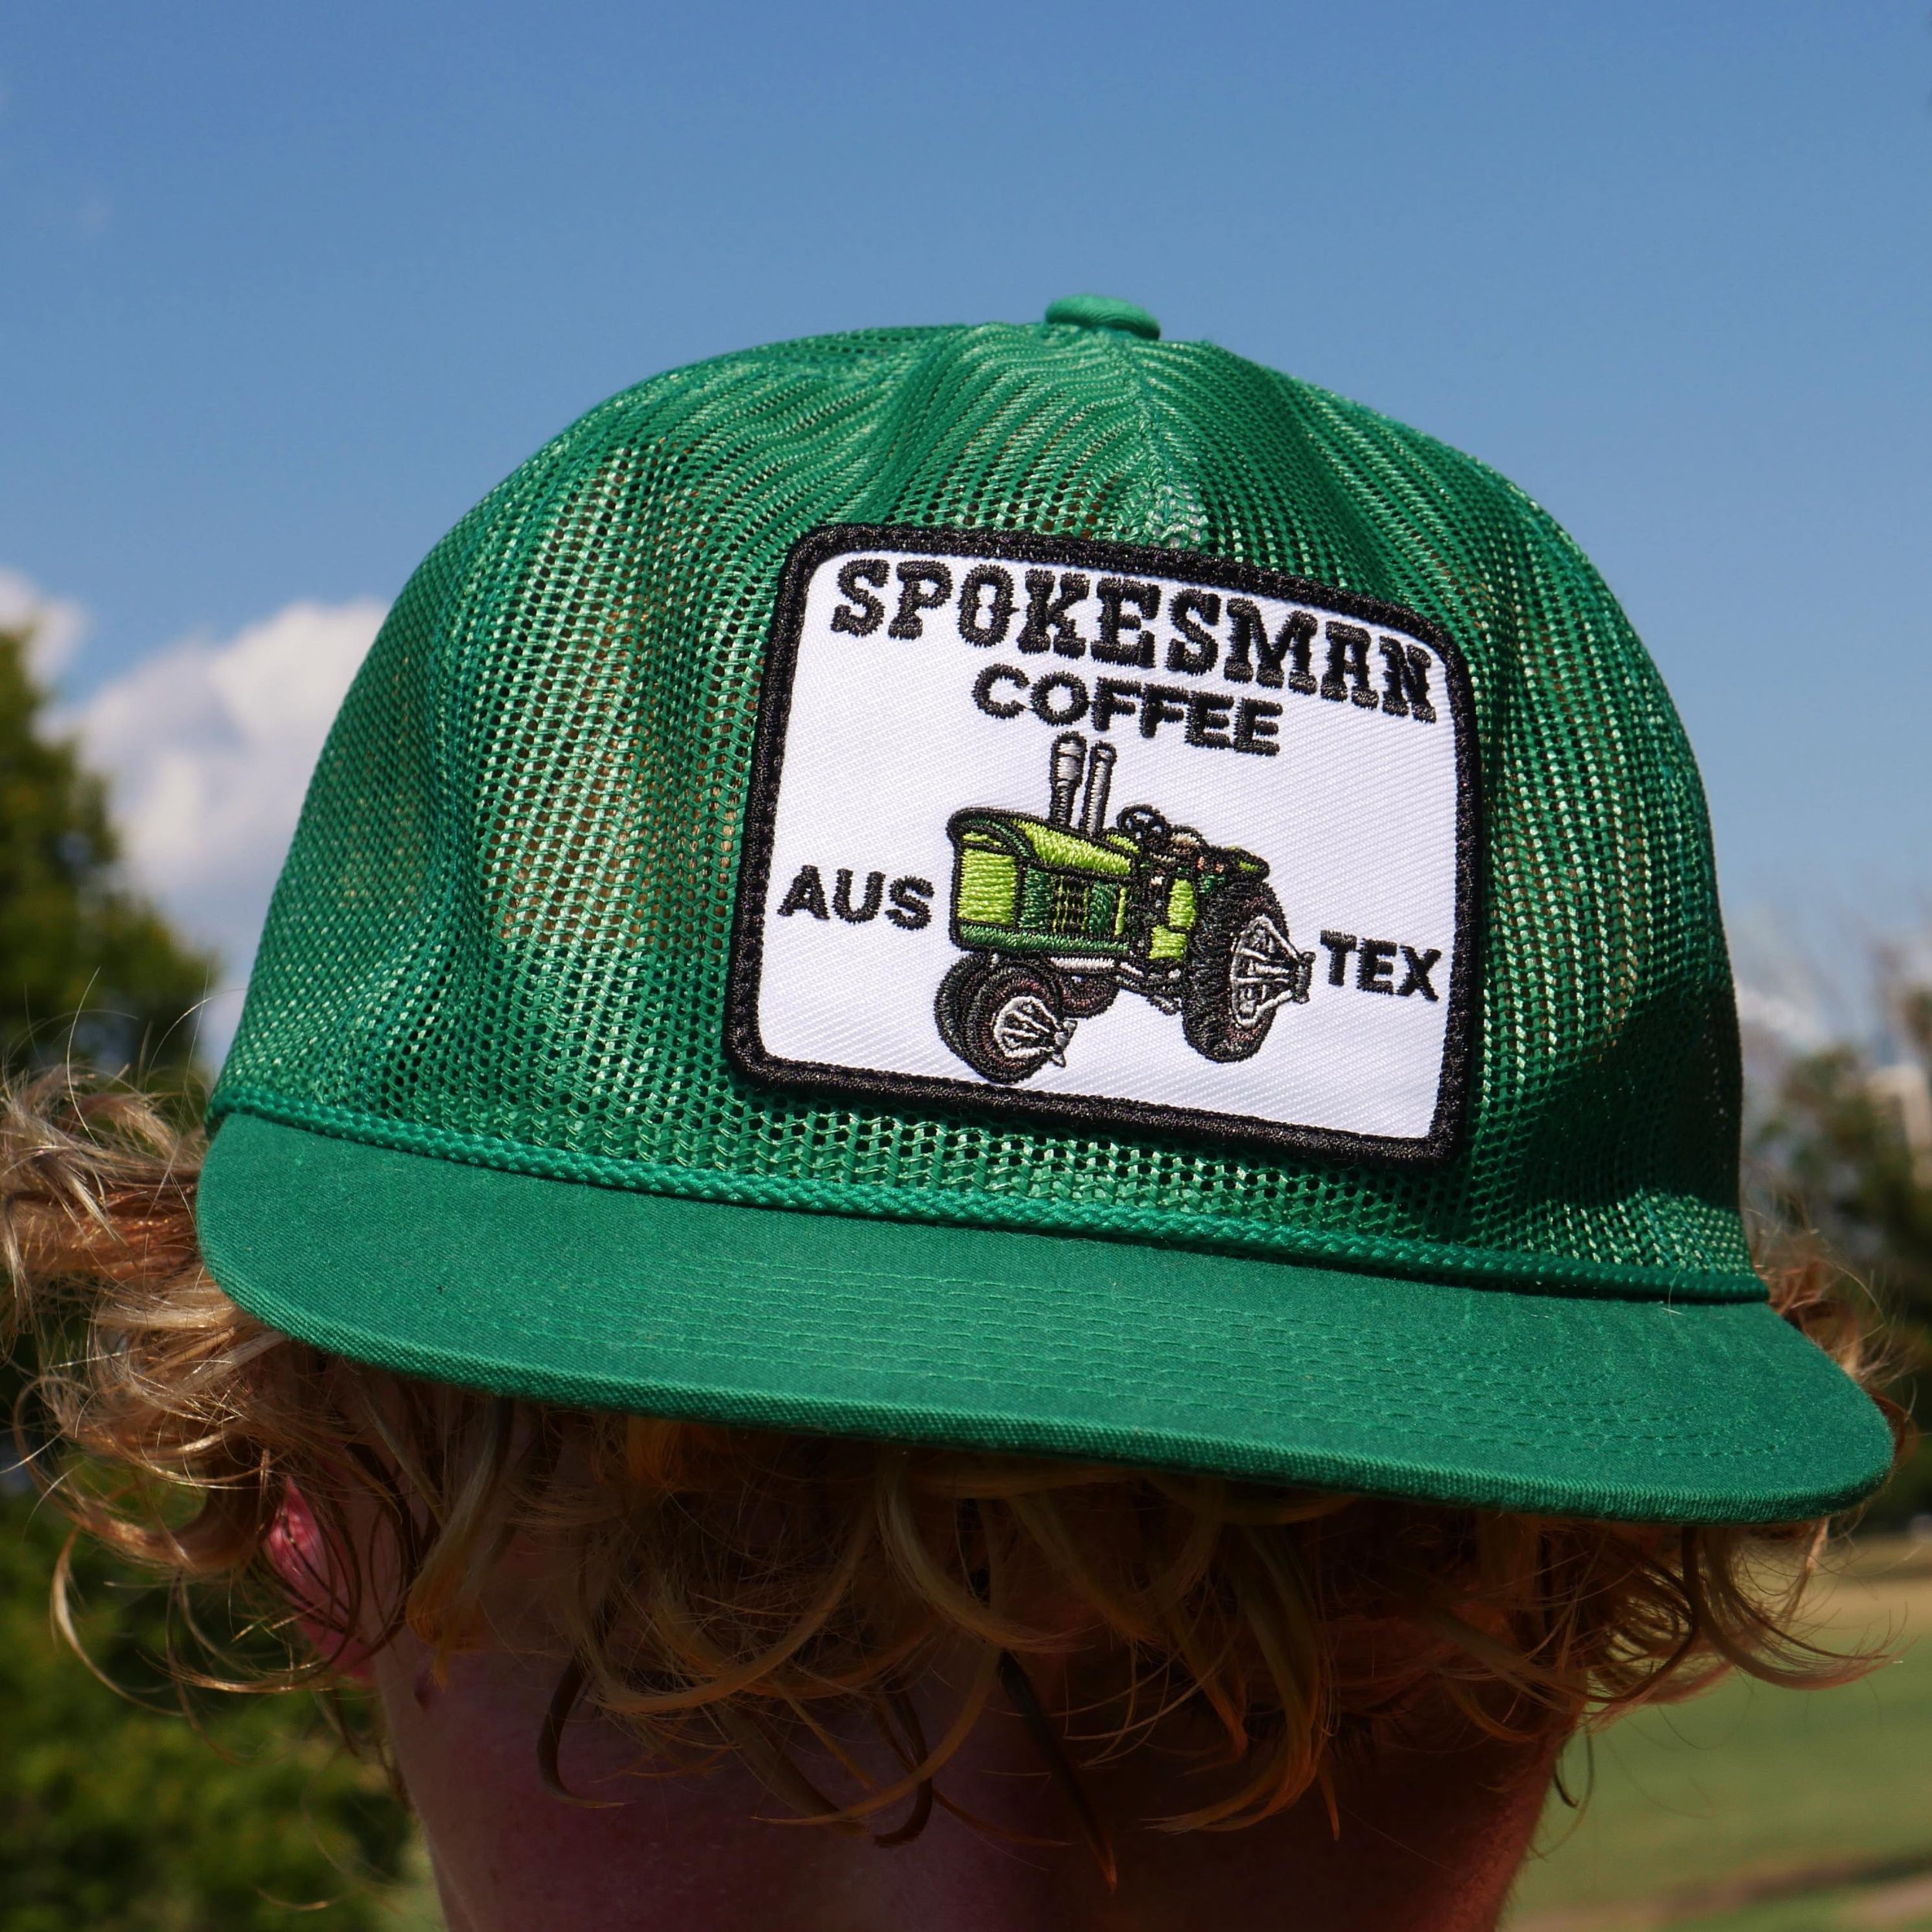 FARM FRESH HATS 🤠 
Grab one online with some FIVE dollar tees - while supplies last!